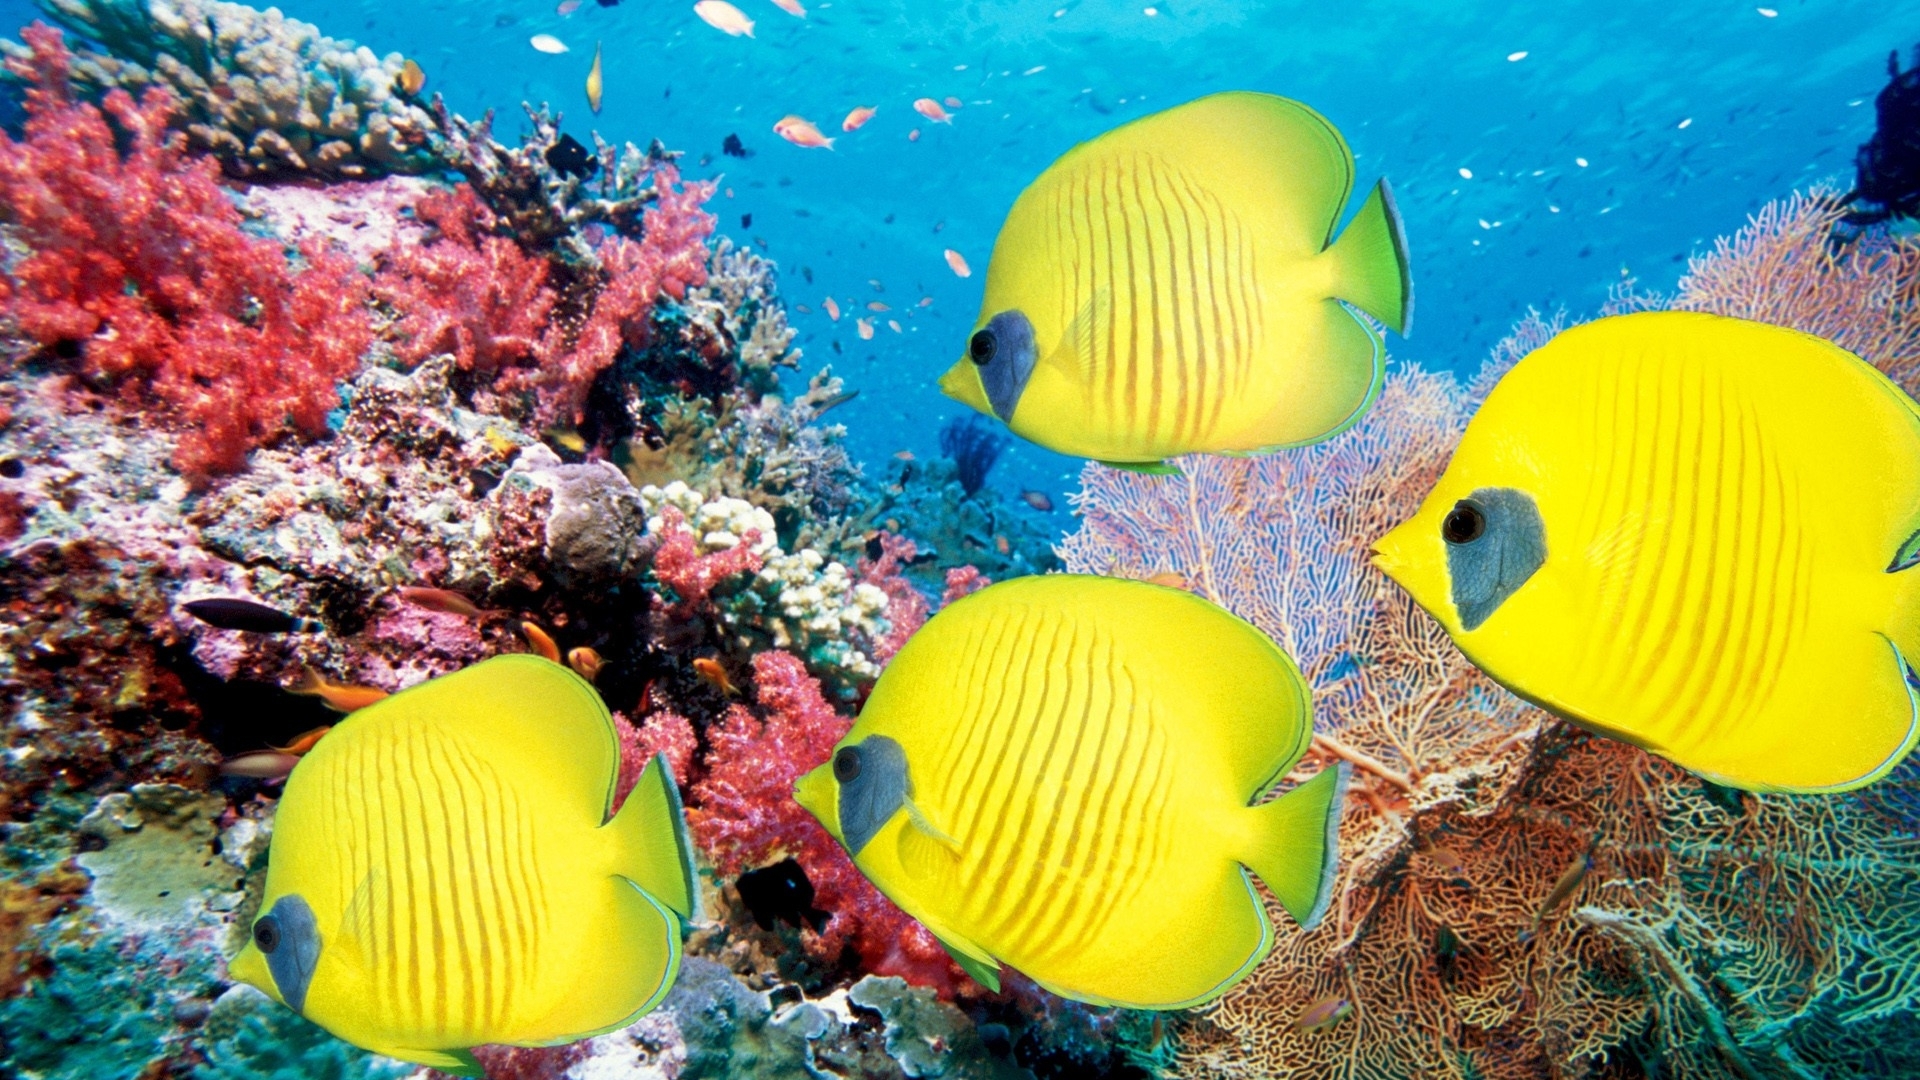 animals, Fishes, Ocean, Sea, Life, Tropical, Underwater, Water, Color, Yellow, Bright, Reef, Coral, Eyes Wallpaper